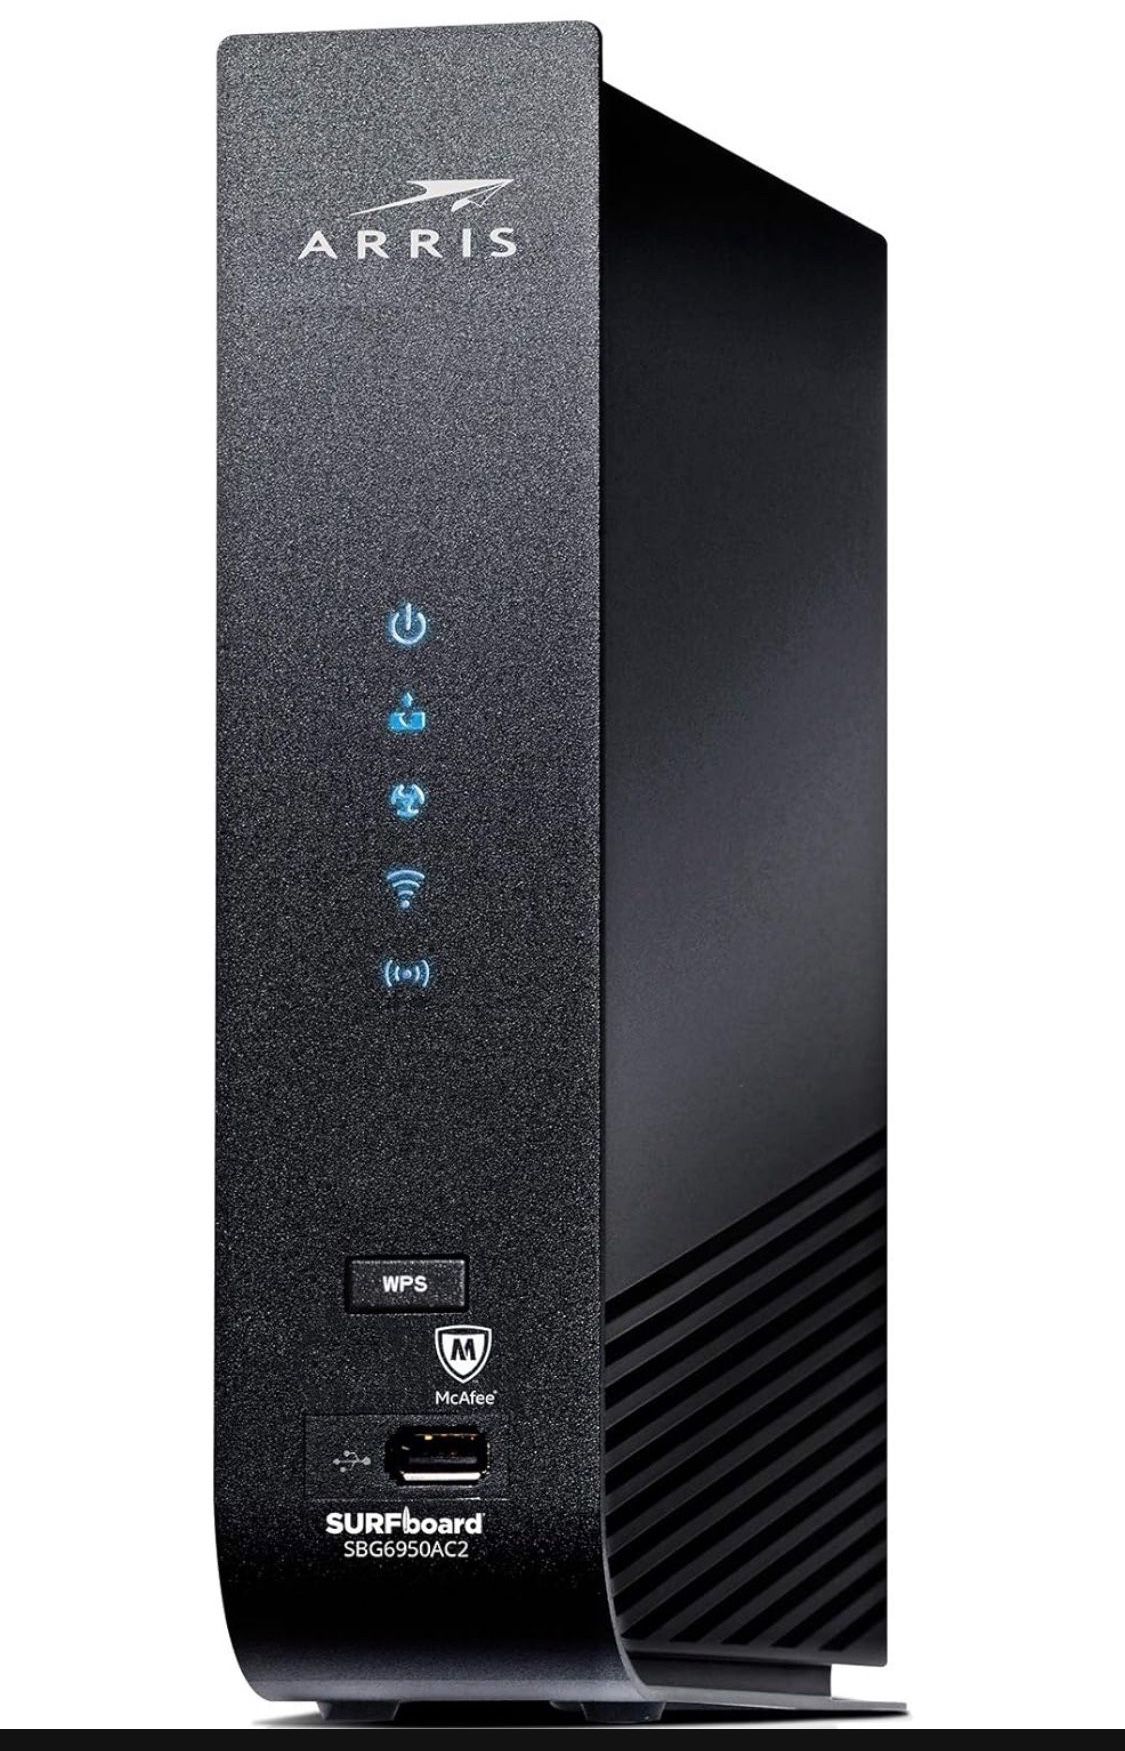 ARRIS Surfboard SBG6950AC2-RB DOCSIS 3.0 AC1900 Cable Modem and Wi-Fi Router, Approved for Comcast